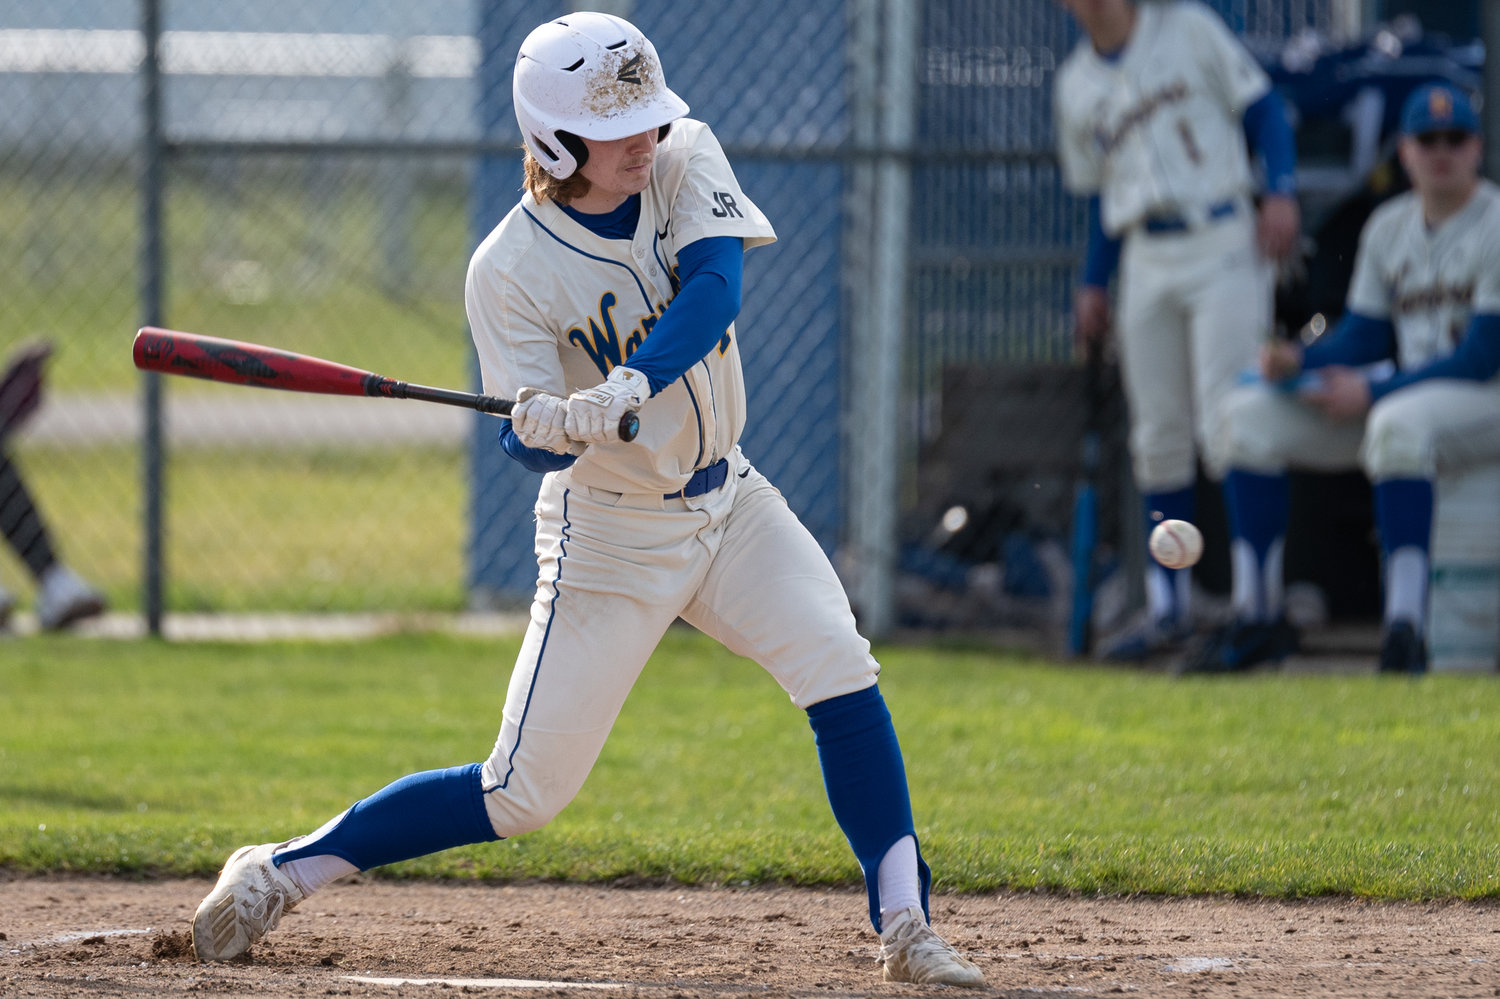 Rochester's Braden Hartley eyes a ball before taking a swing against Shelton April 7.